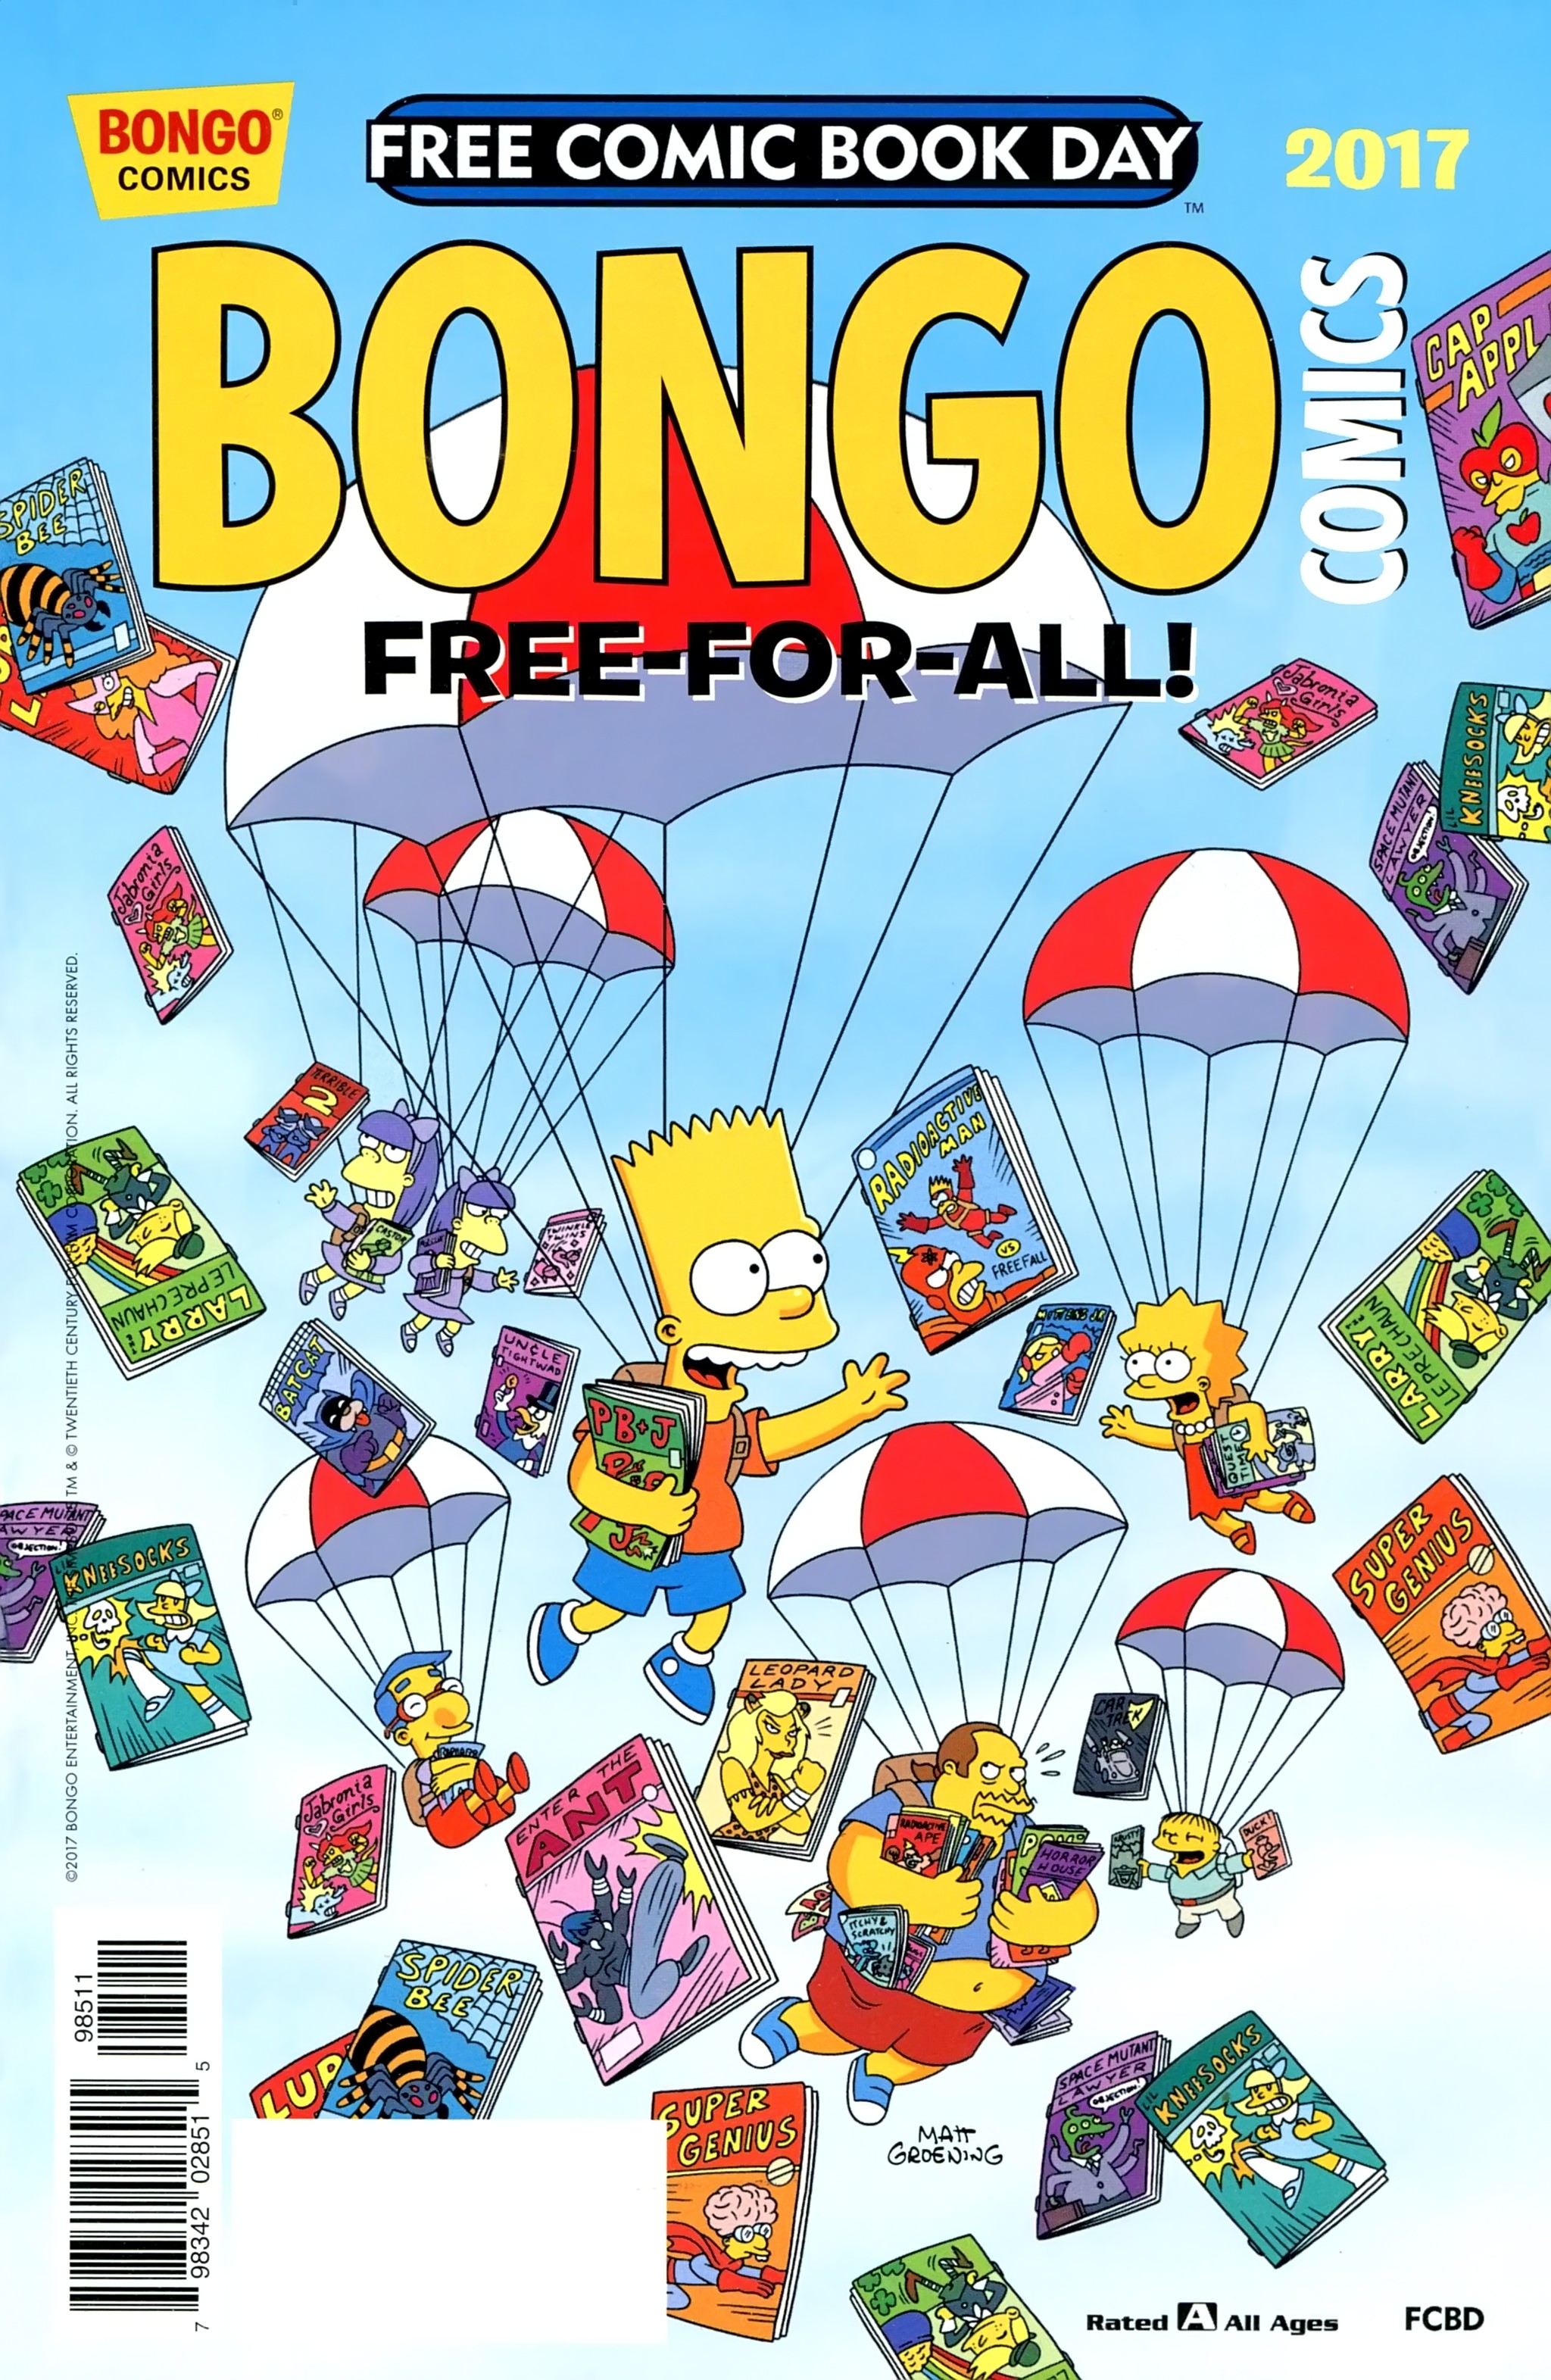 Read online Free Comic Book Day 2017 comic -  Issue # Bongo Comics Free-For-All - 1